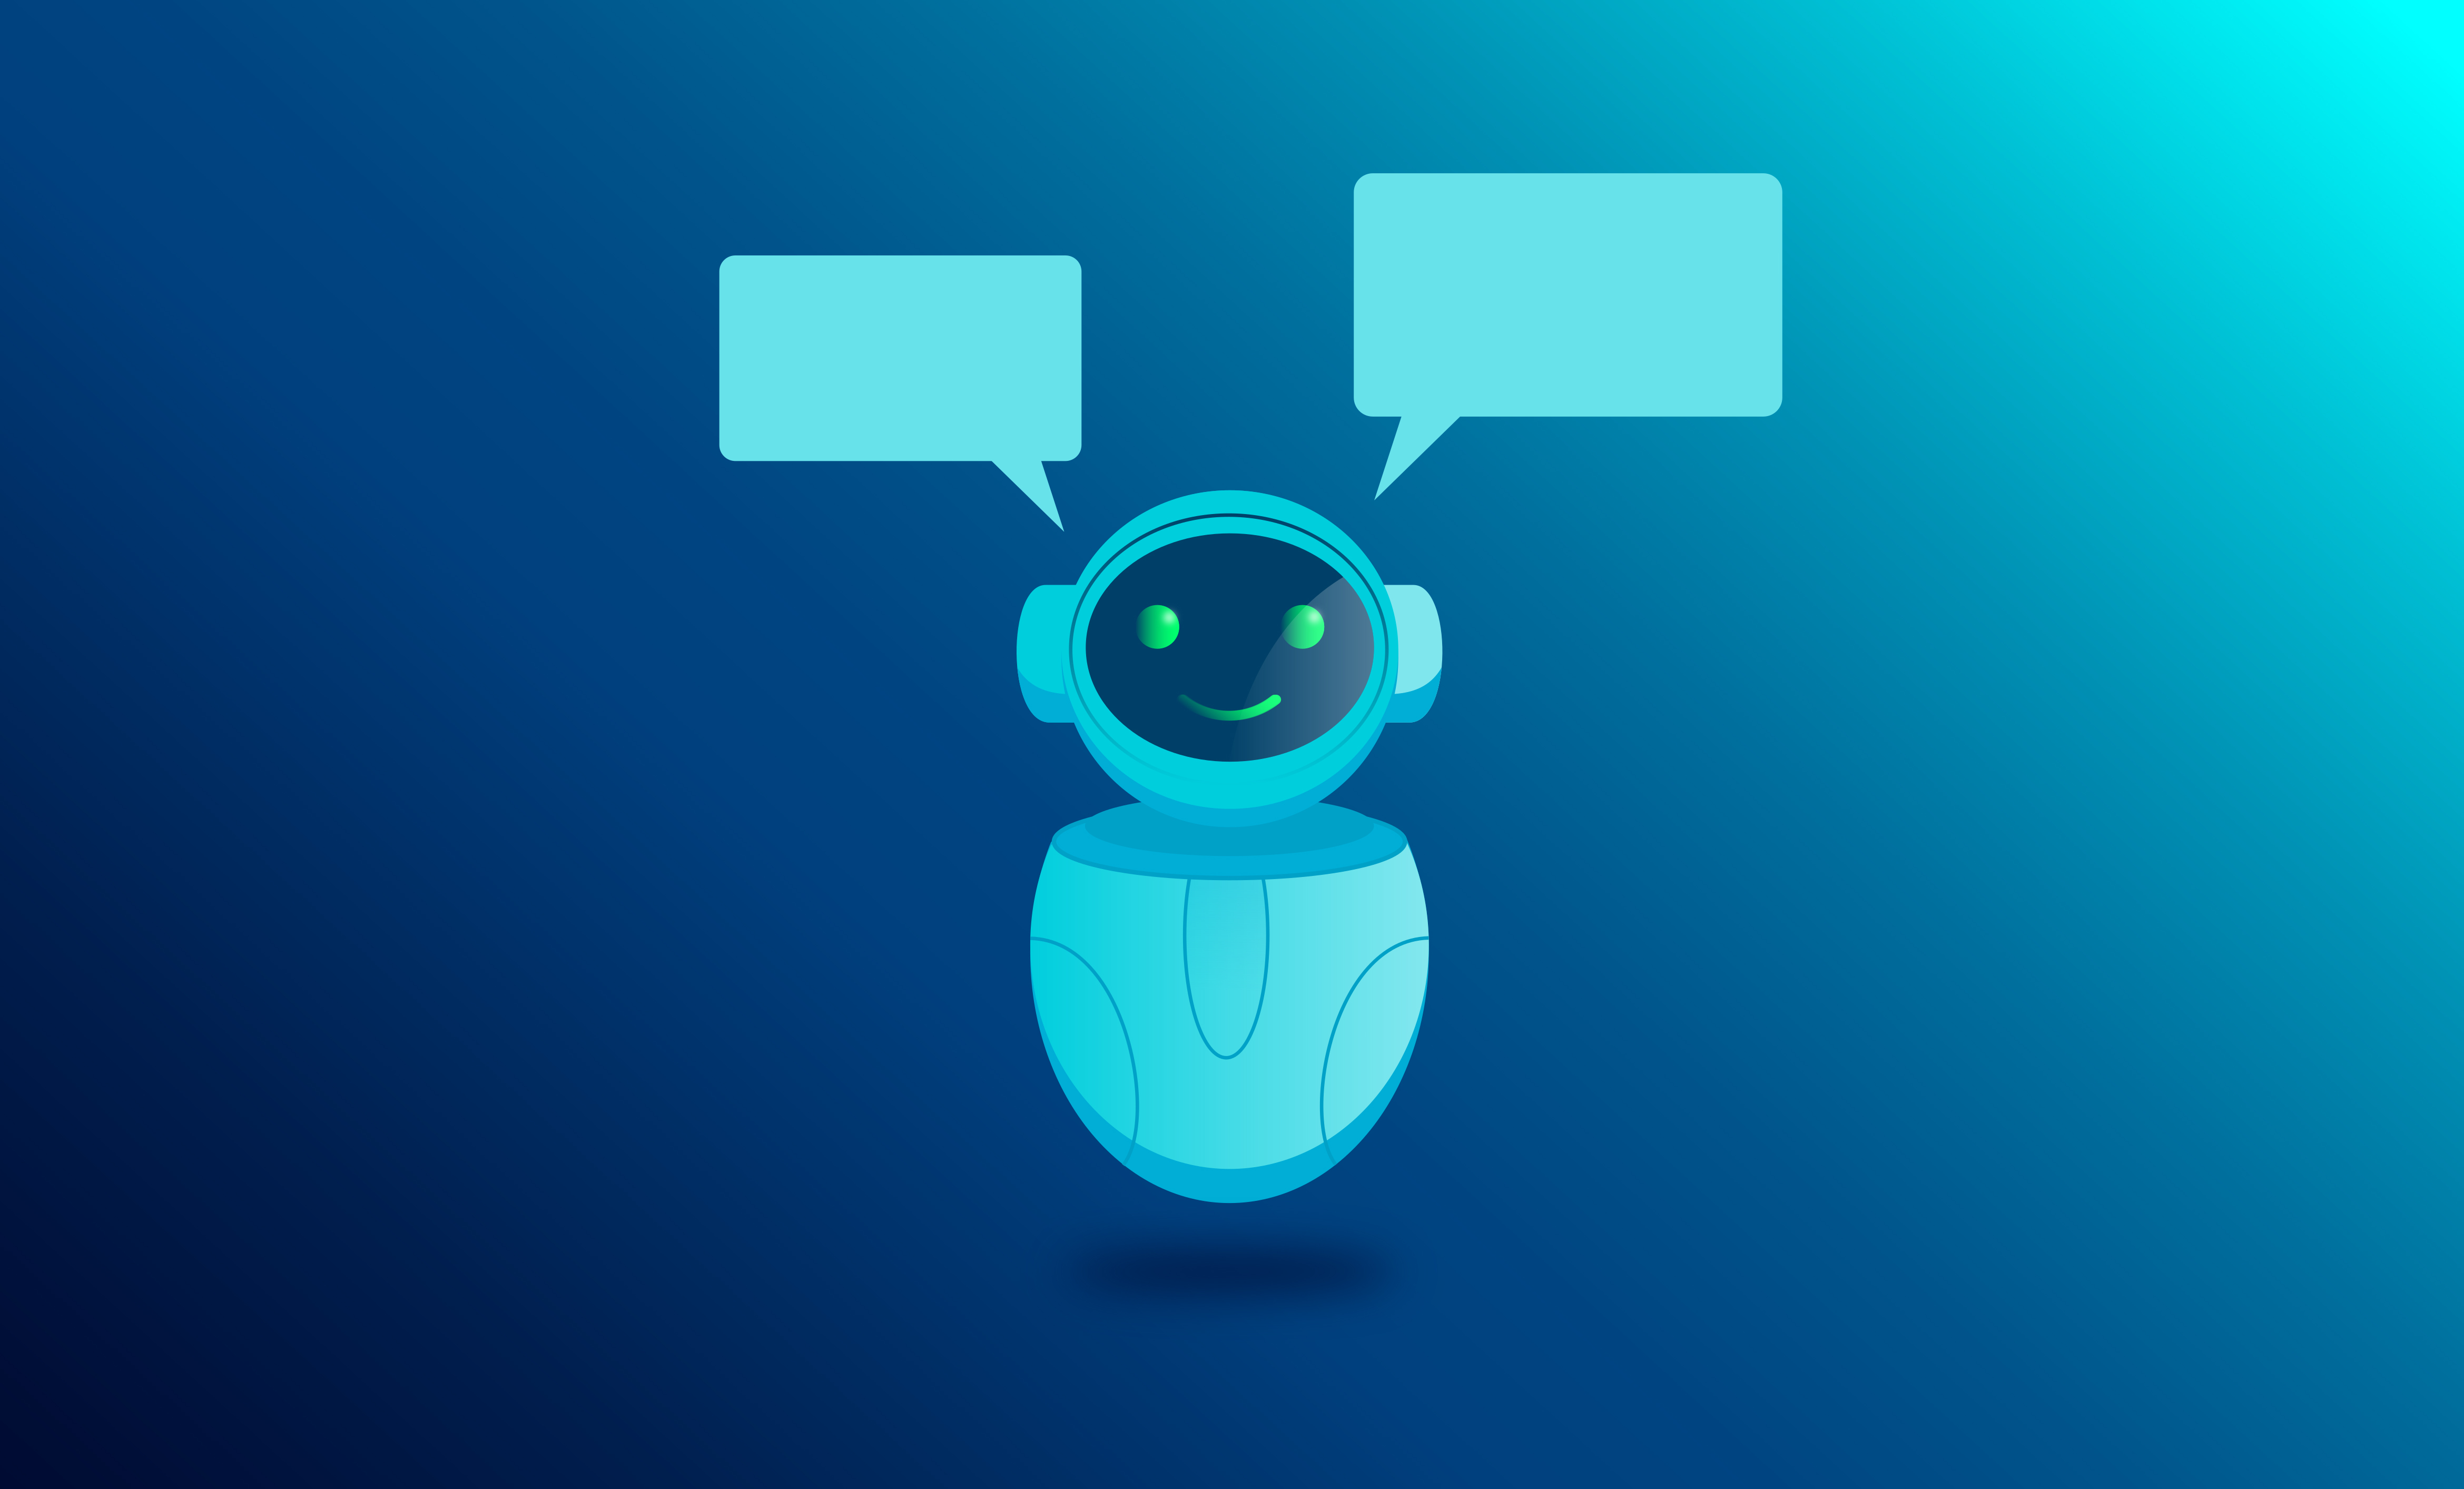 Simple Robot - Personal Assistant - Chatbot - With Speech Balloo